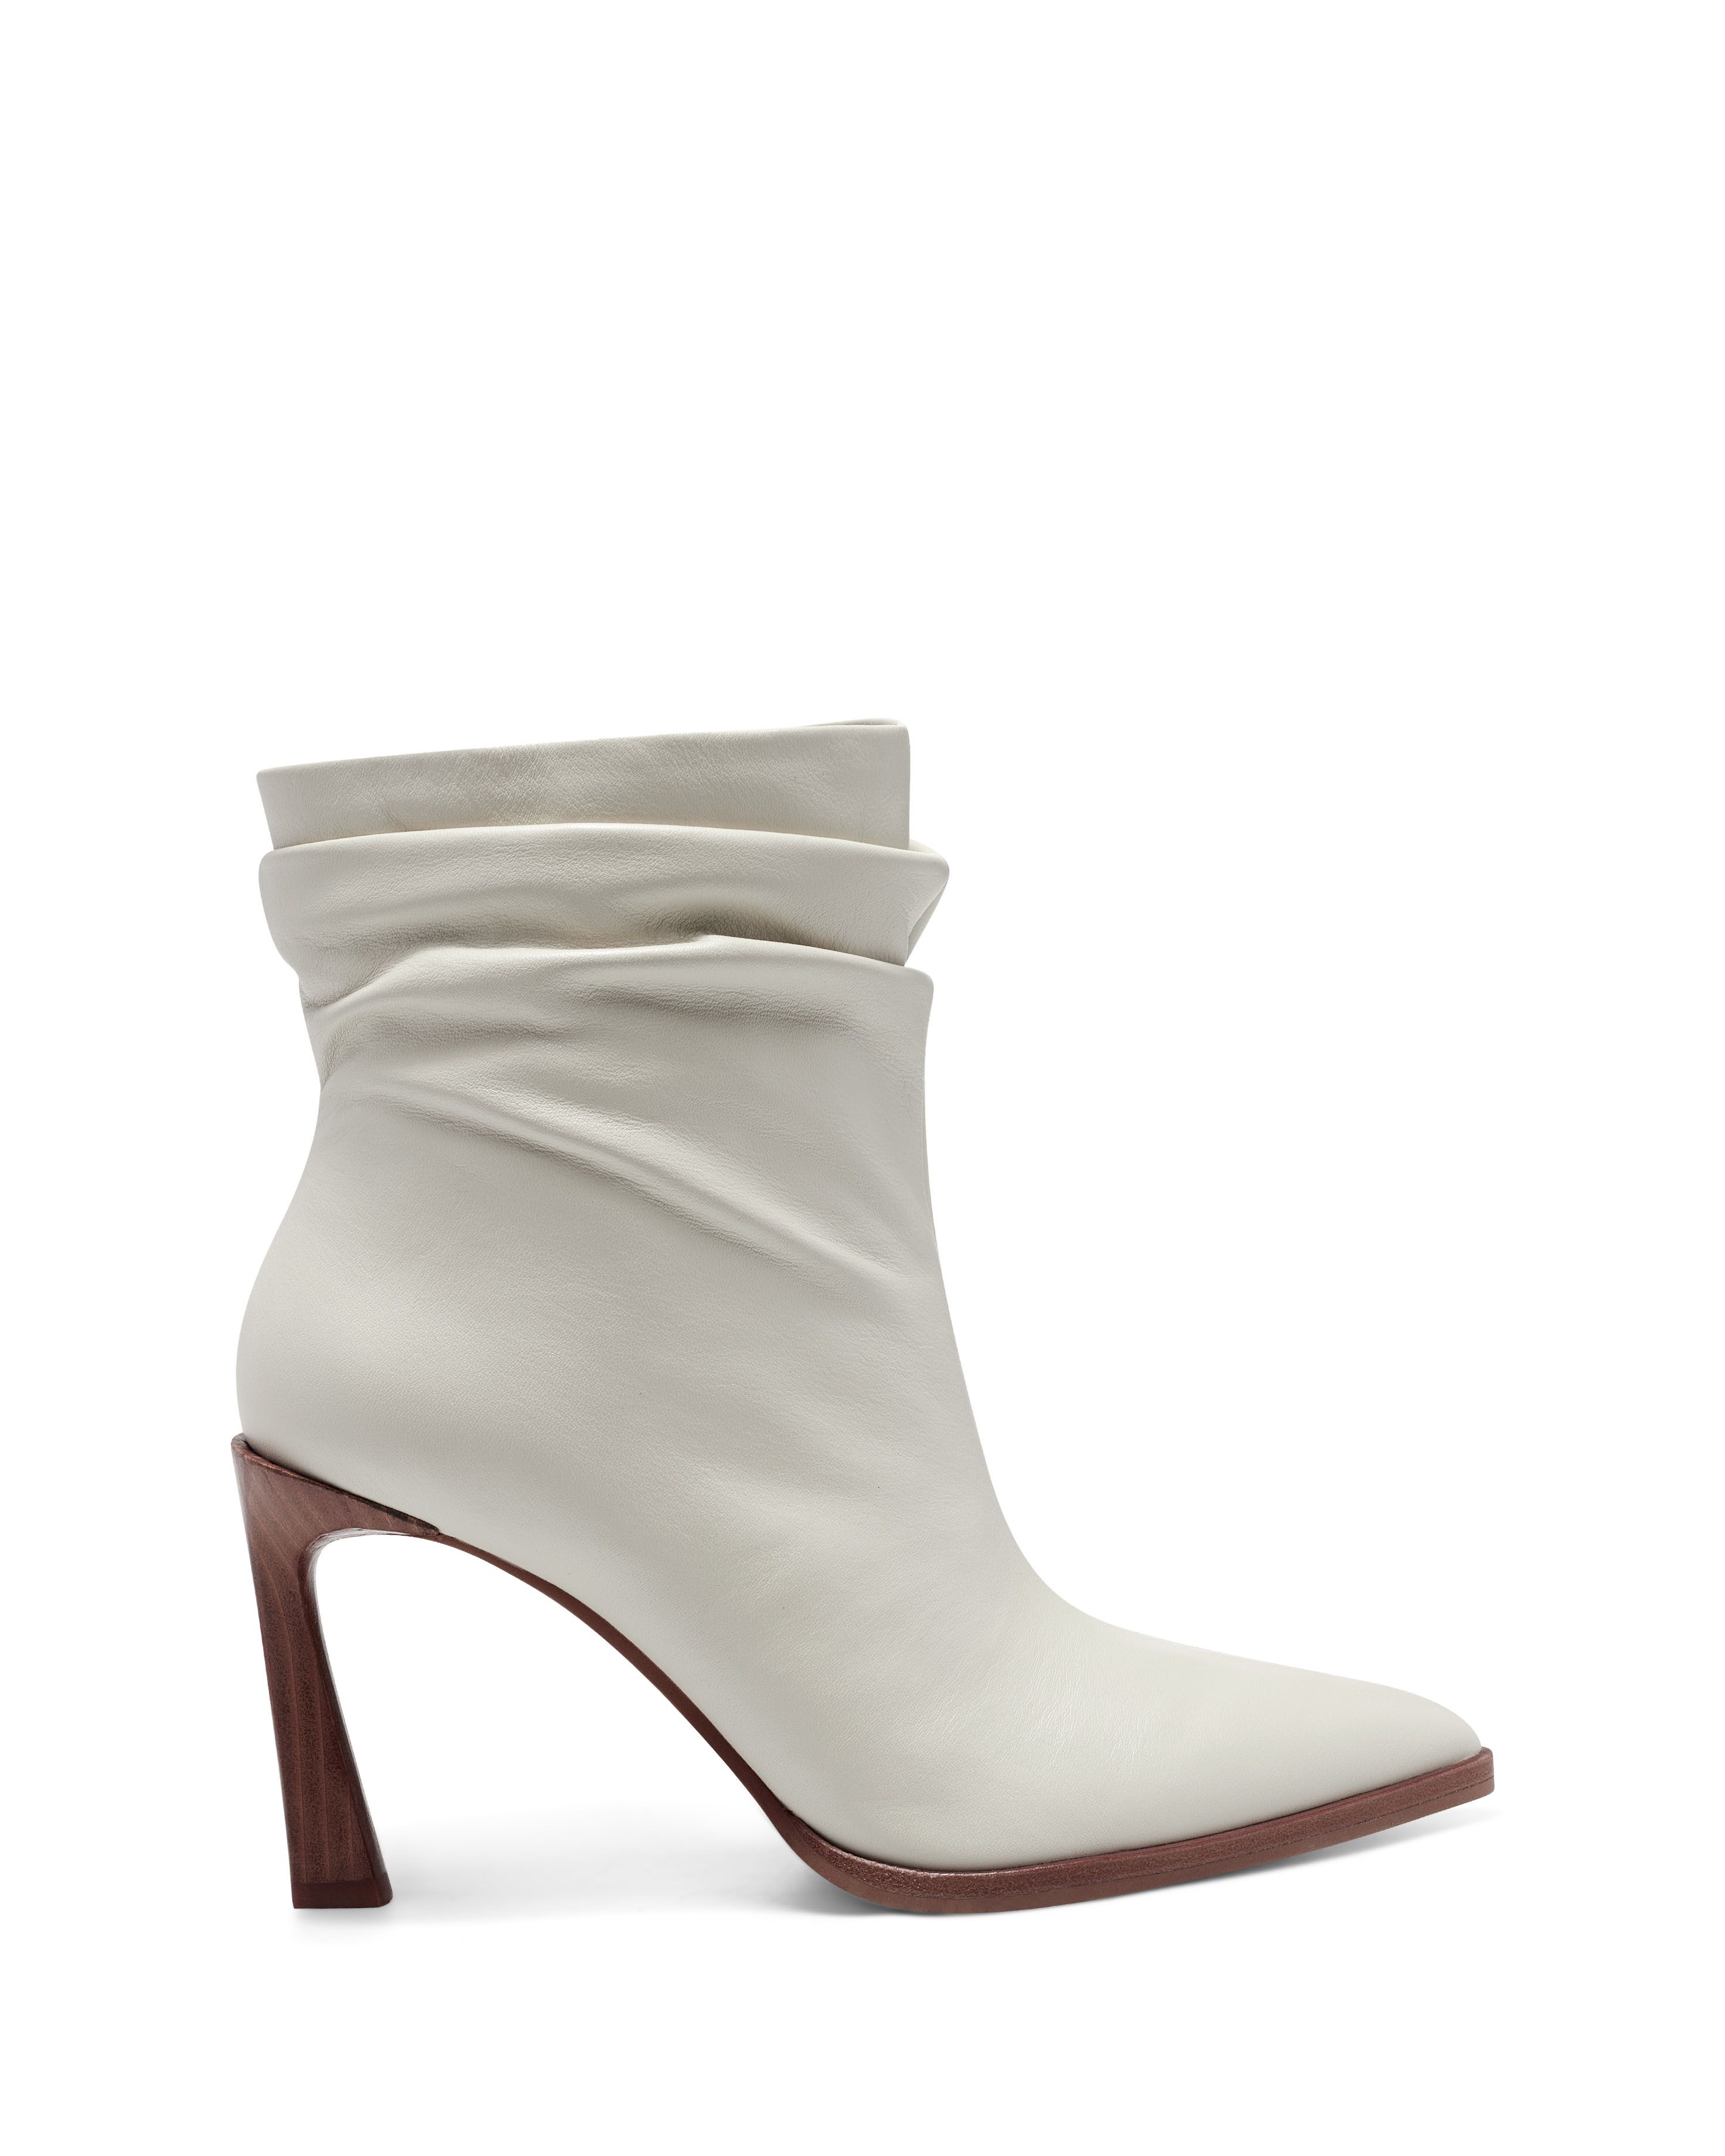 Presindal Bootie | Vince Camuto